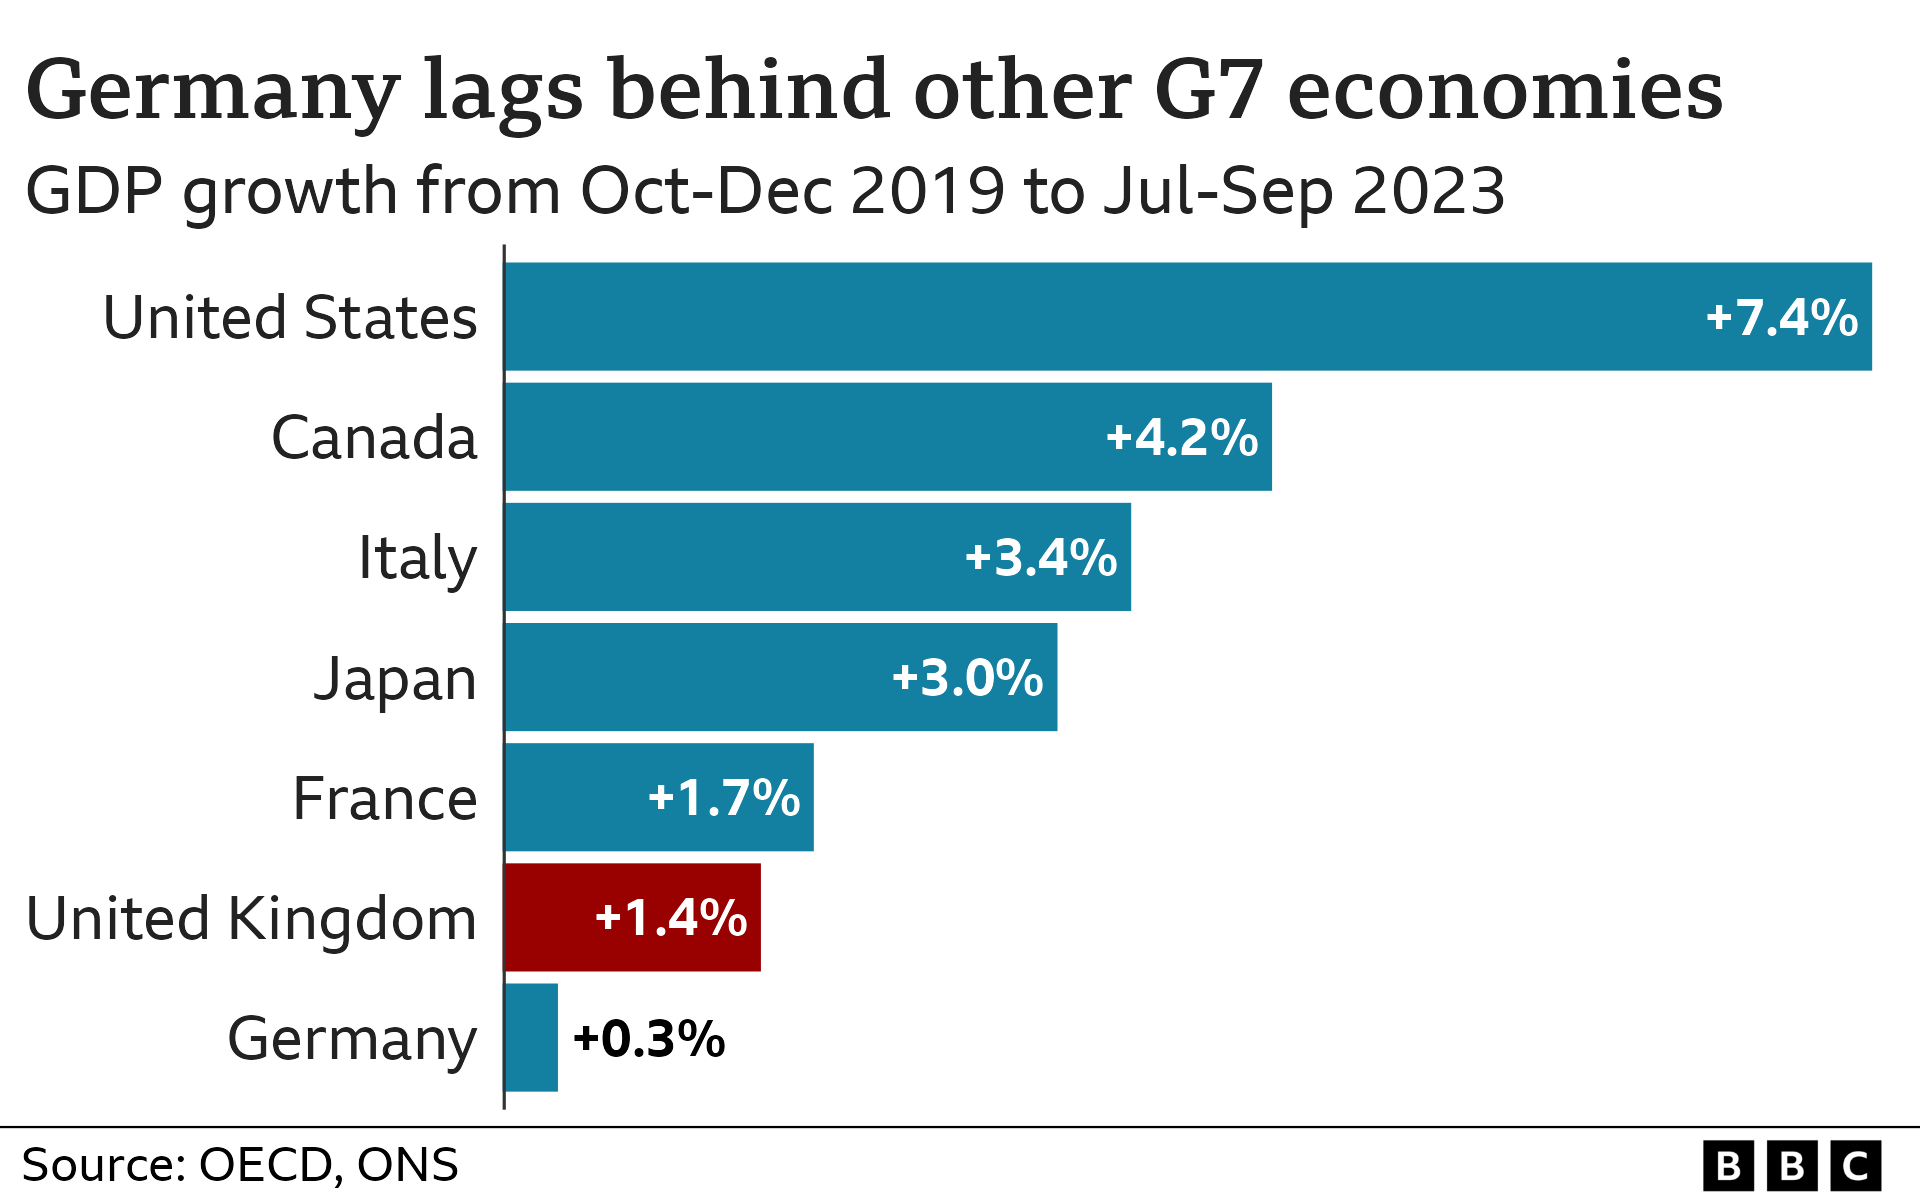 Bar chart comparing the GDP growth from October-December 2019 to July-September 2023 for G7 economies. The chart shows that Germany's growth lags behind other G7 countries, with the United States showing the highest growth at 7.4%.